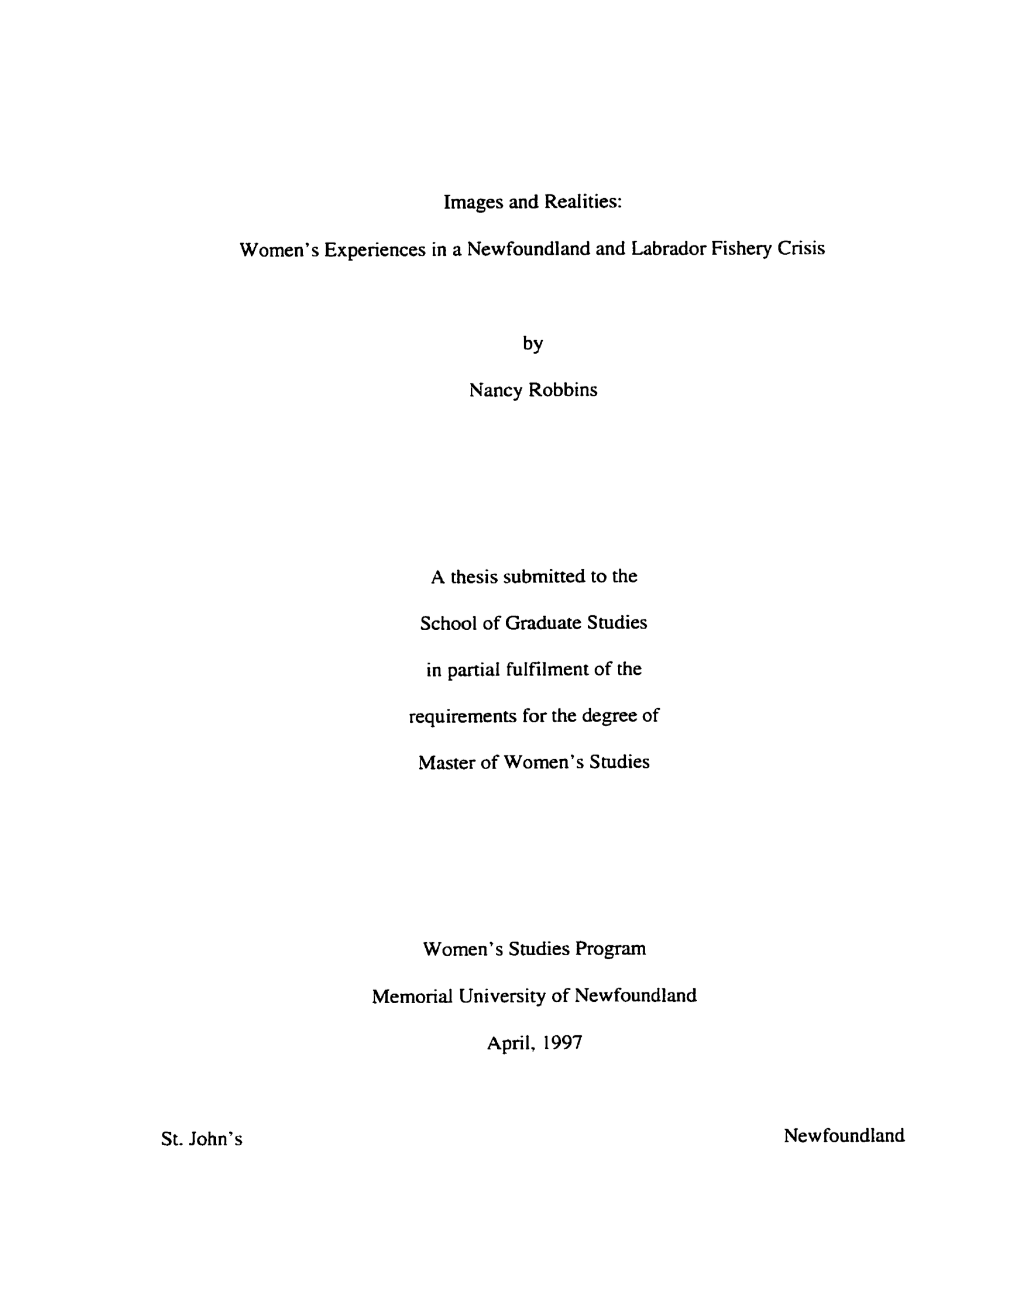 Women's Experiences in a Newfoundland and Labrador Fishery Crisis by Nancy Robbins a Thesis Submitted to Th